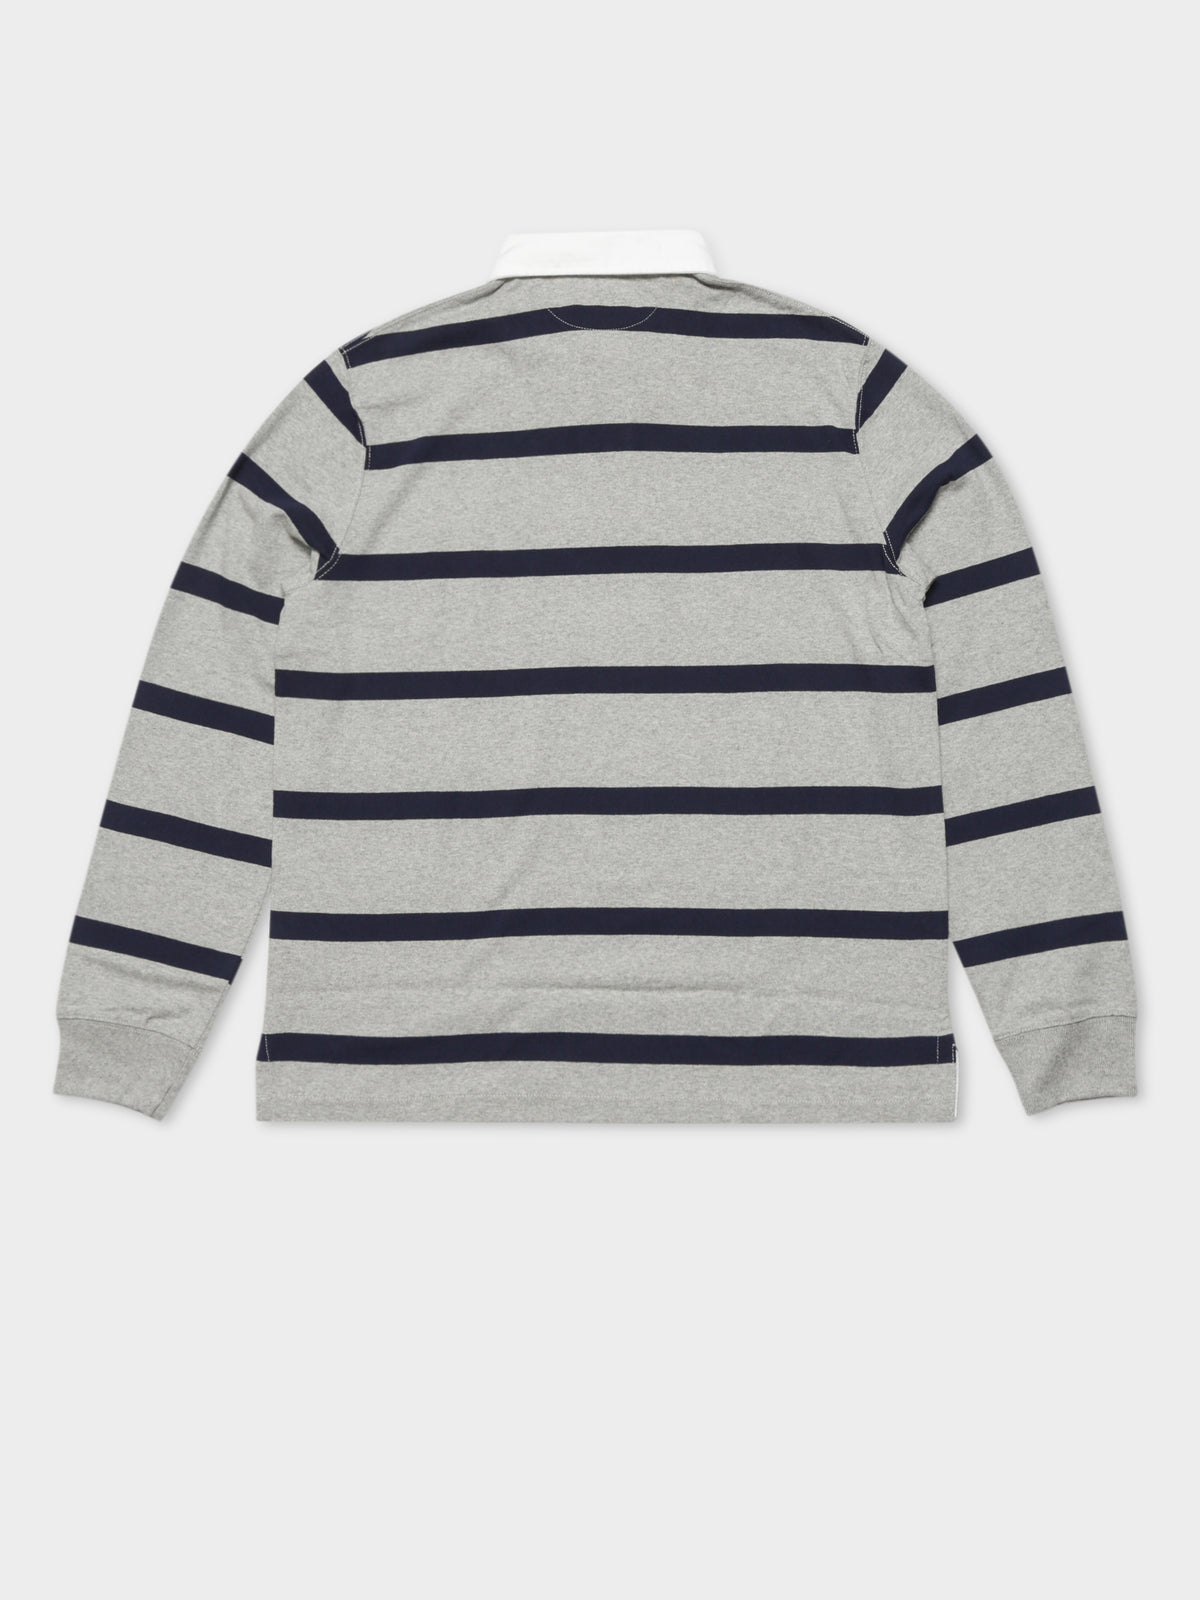 Long Sleeve Rugby Shirt in Grey &amp; Navy Stripe